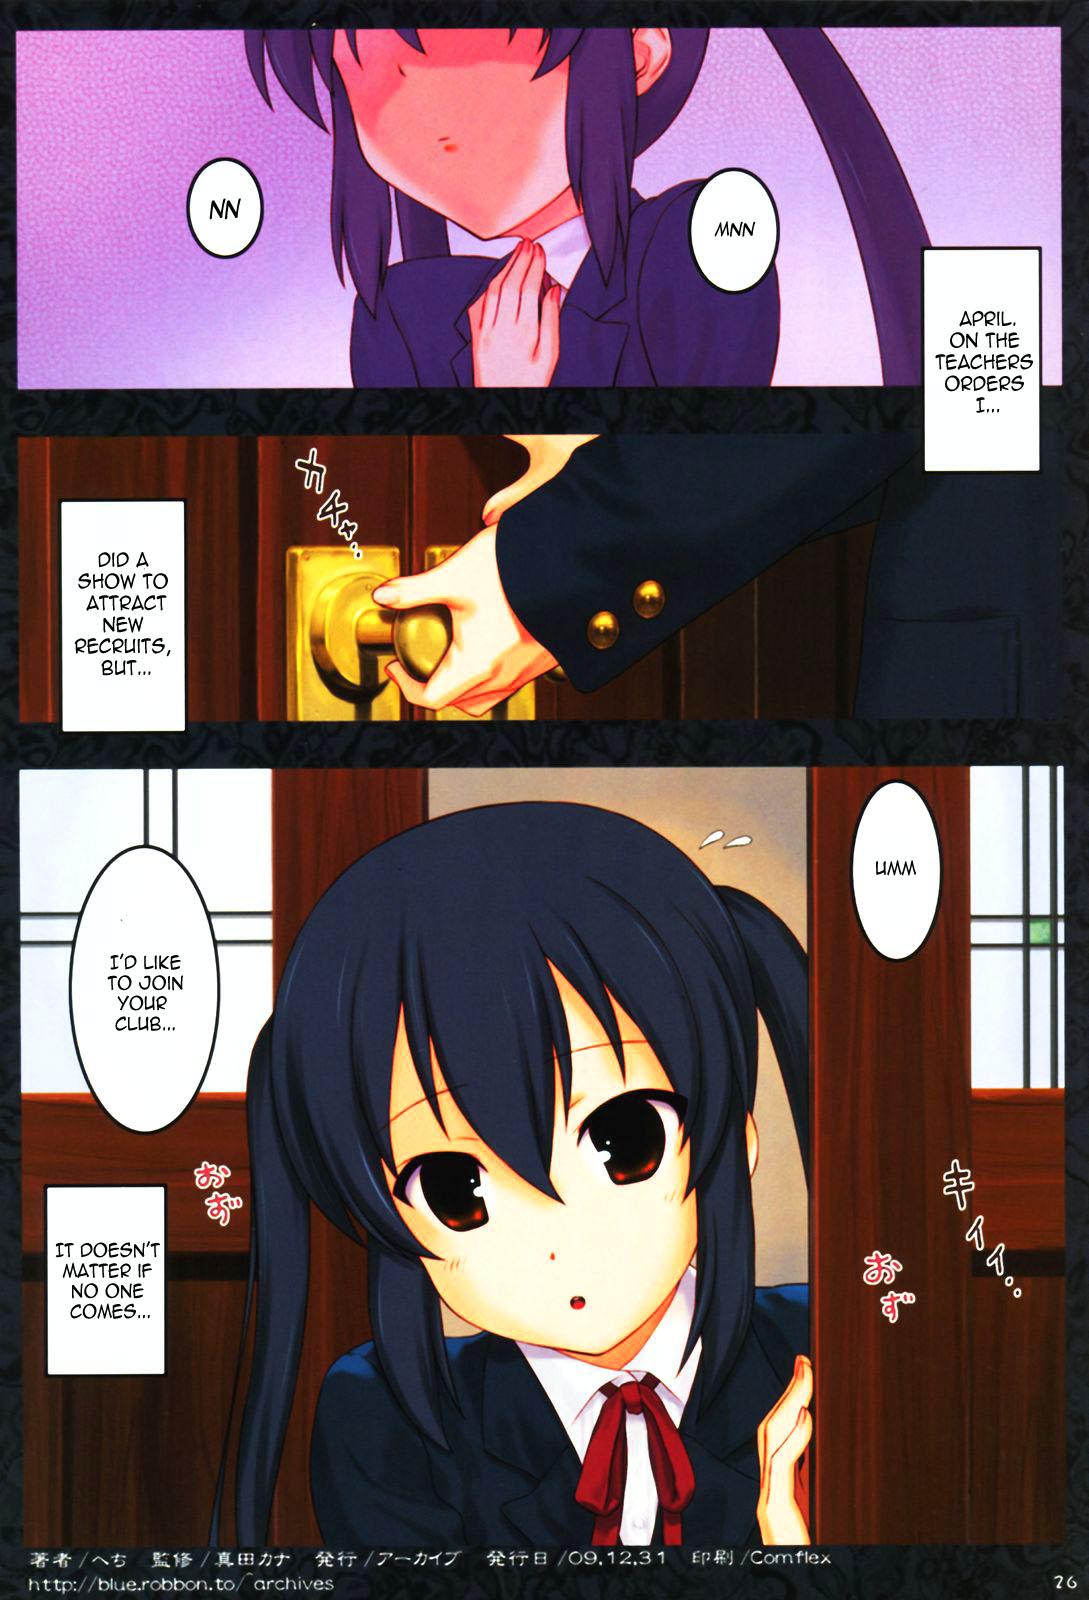 Bang (C77) [Archives (Hechi)] Ura K-ON!! 2 | The Other K-ON!! 2 (K-ON!) [English] =LWB= - K on Ameture Porn - Page 26